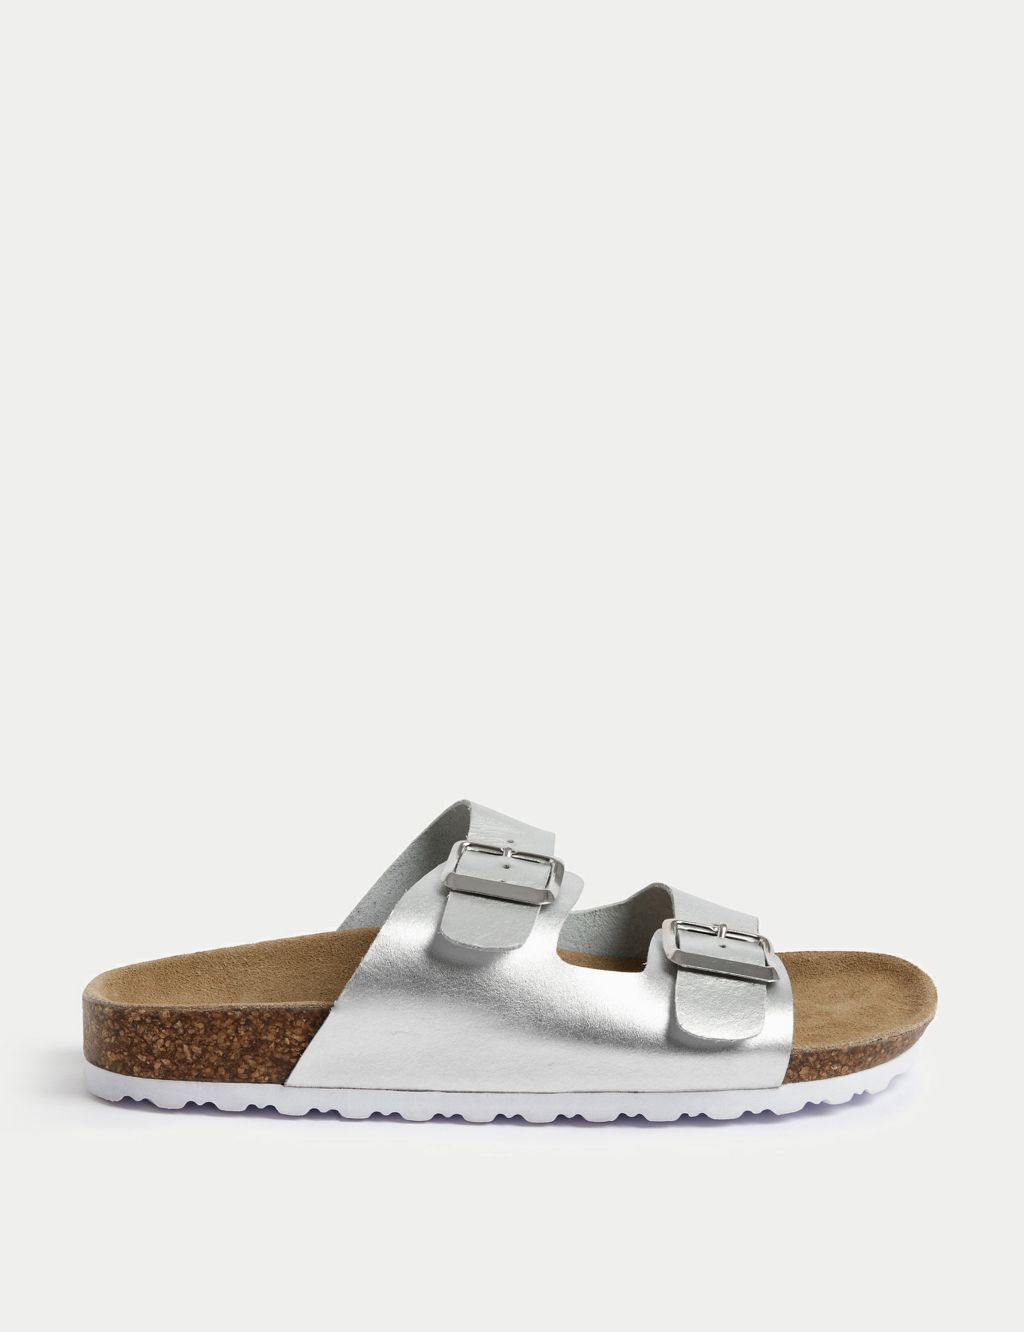 Leather Two Strap Sandals Mid image 1